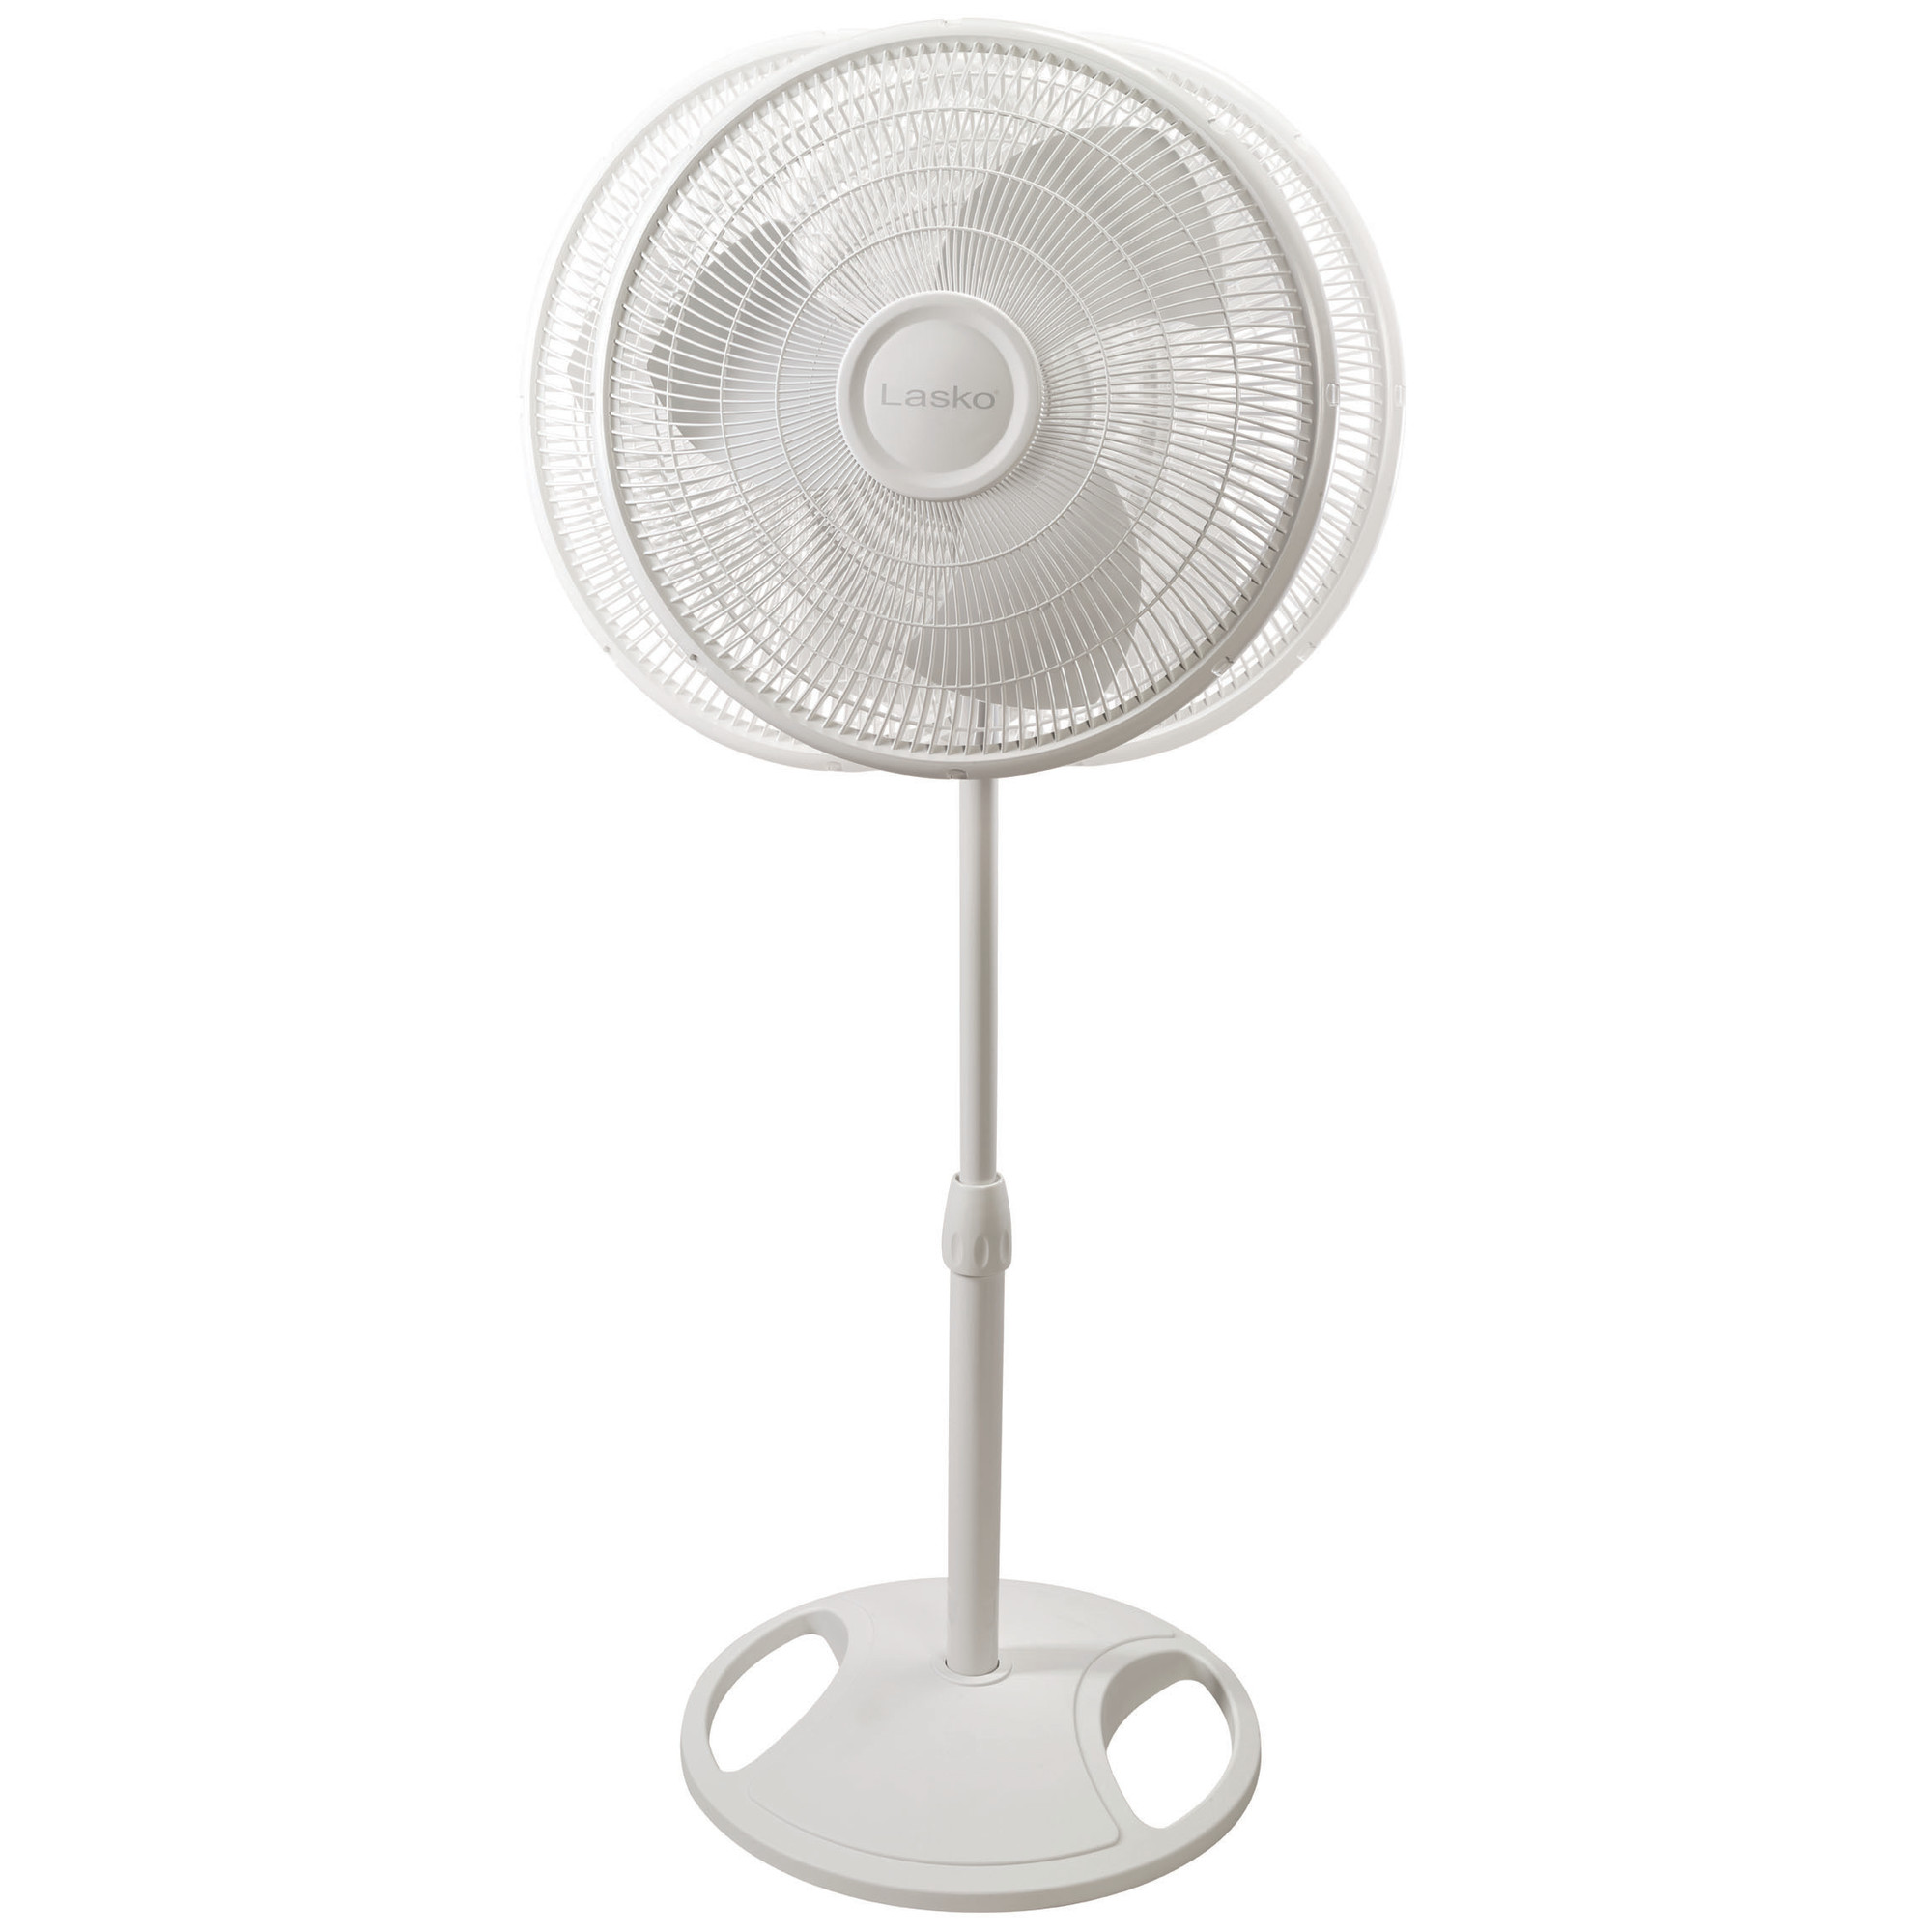 Lasko 16" Oscillating 3-Speed Pedestal Fan with Adjustable Height, 47" H, White, S16200, New - image 3 of 7